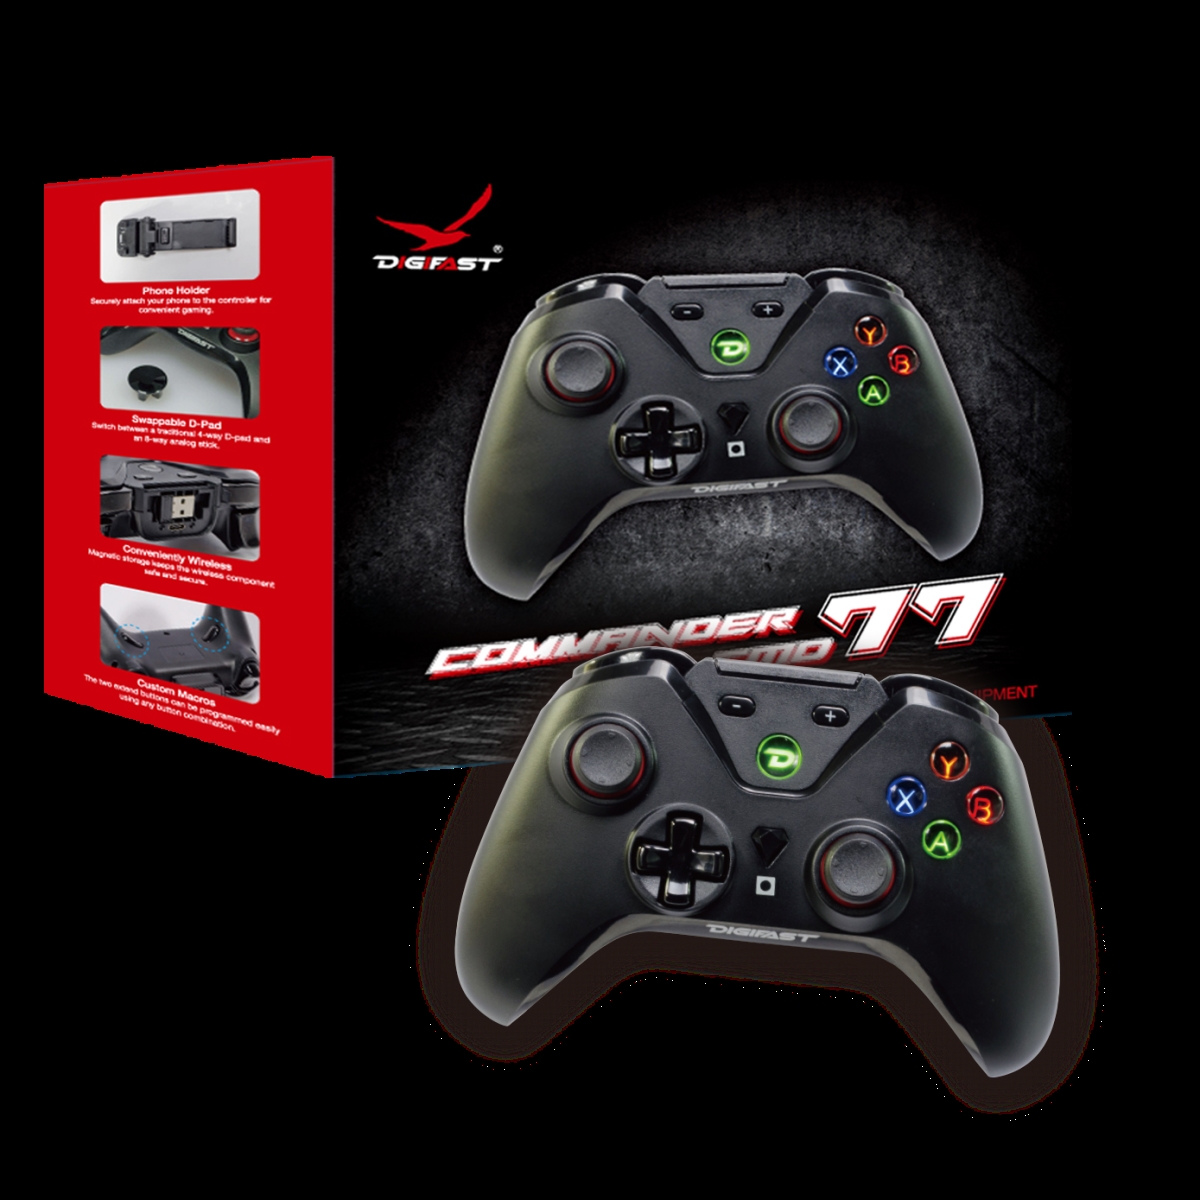 Picture of Digifast CMD77 Commander Series Gaming Wireless Controller